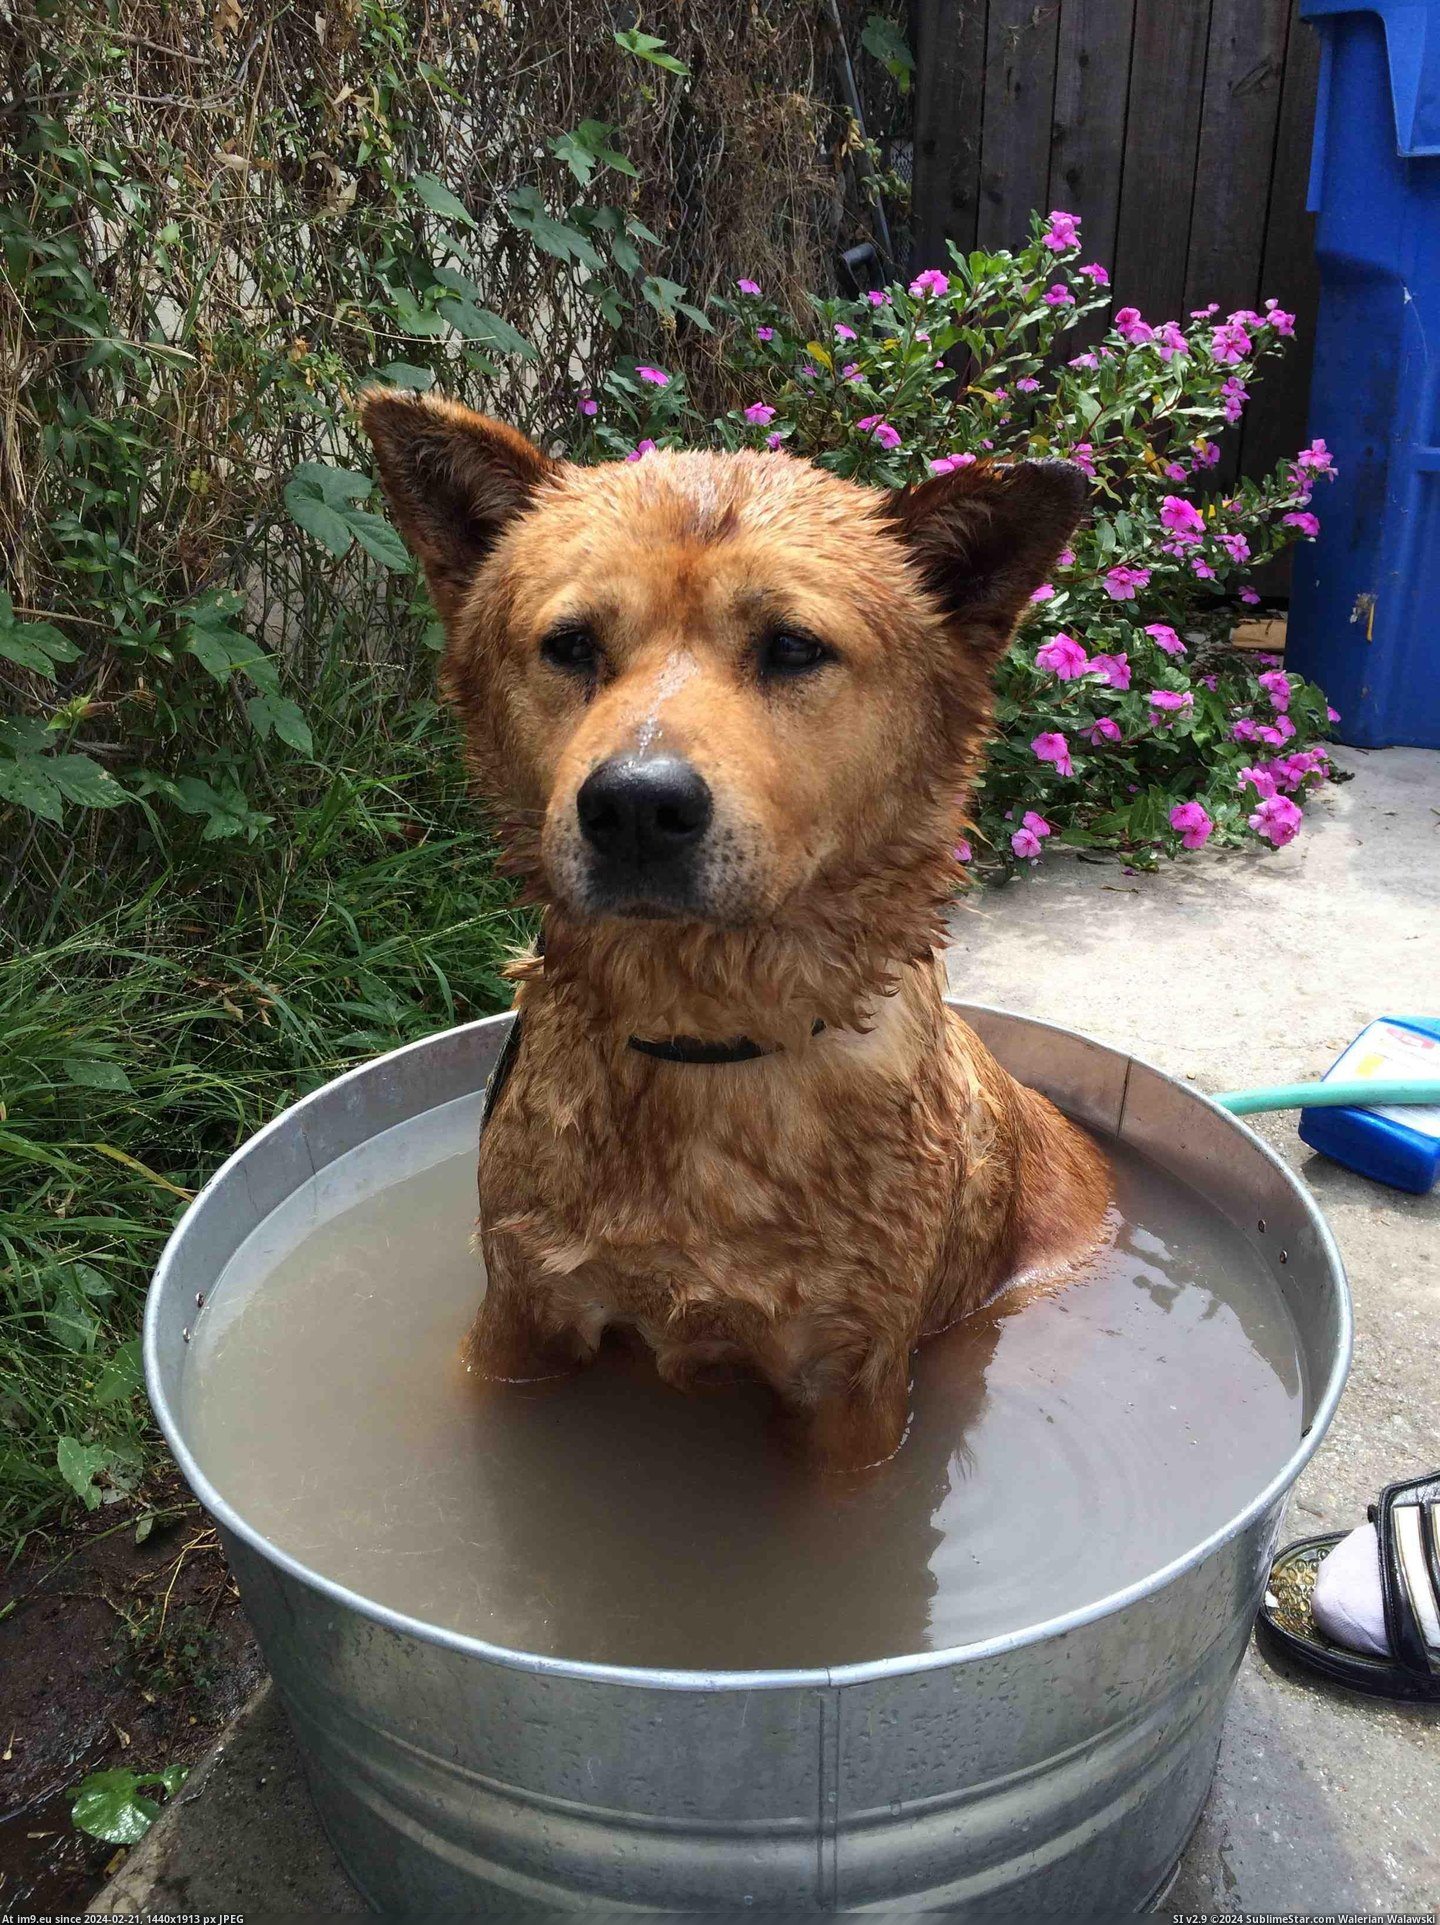 #End #Hates #Quicker #Stays #Washed [Aww] He hates getting washed but he knows if he stays still it'll end quicker Pic. (Bild von album My r/AWW favs))